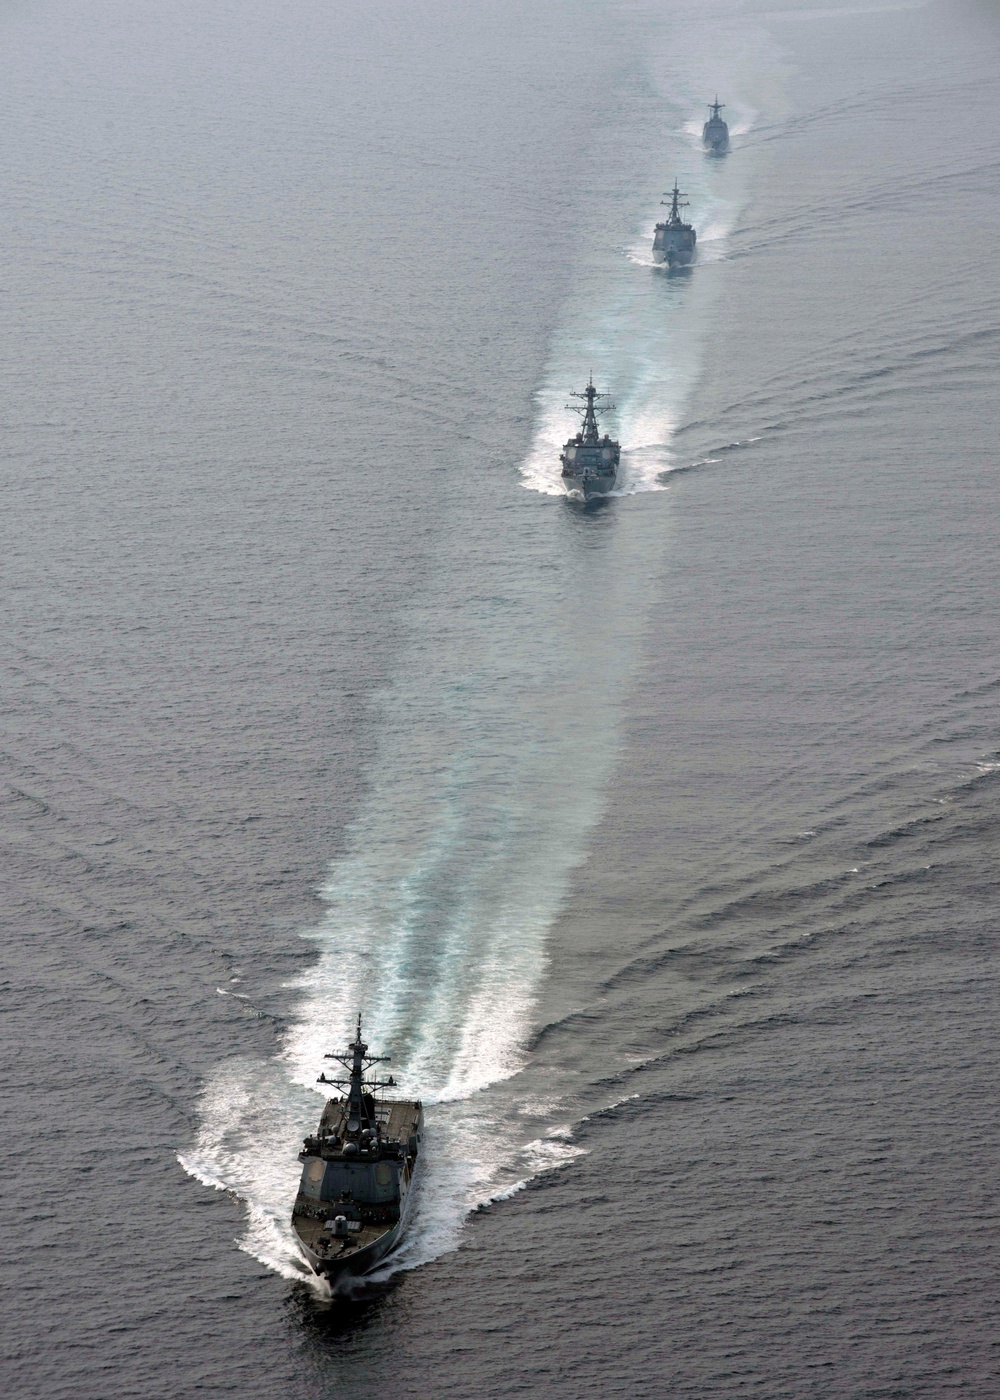 Maritime Show of Force